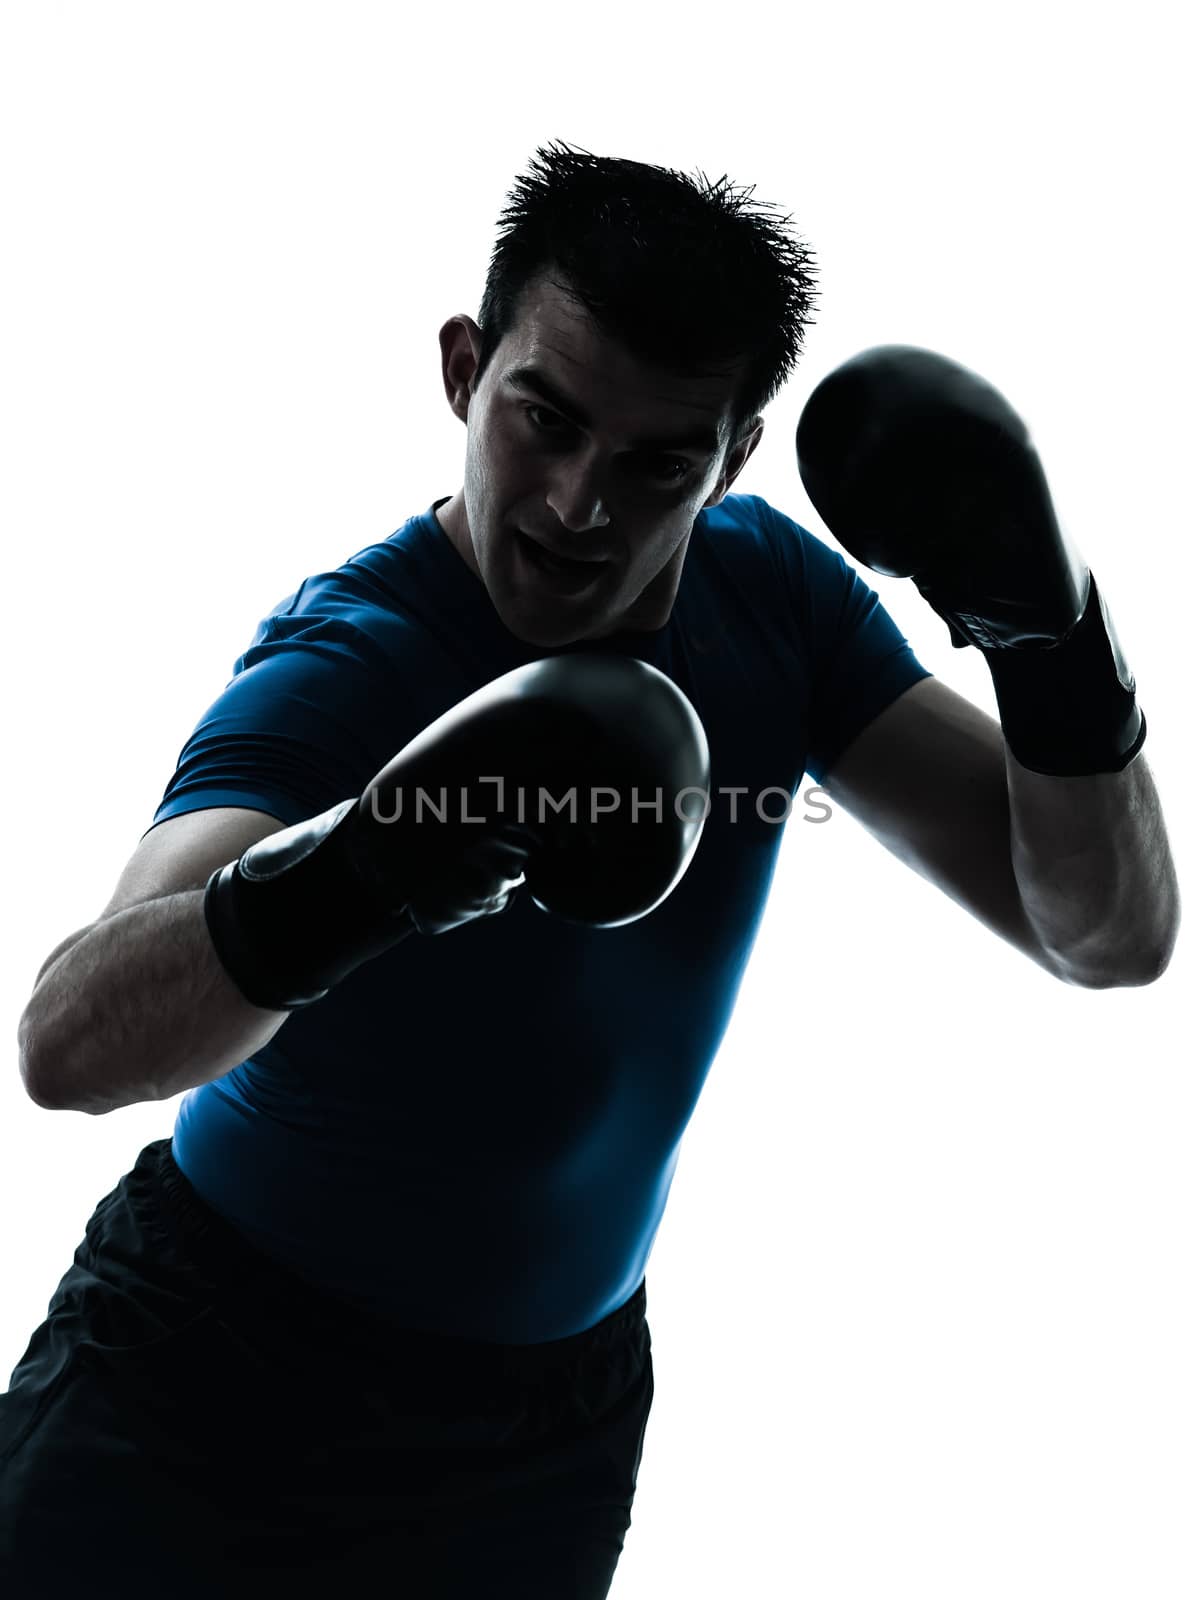 man exercising boxing boxer posture silhouette by PIXSTILL